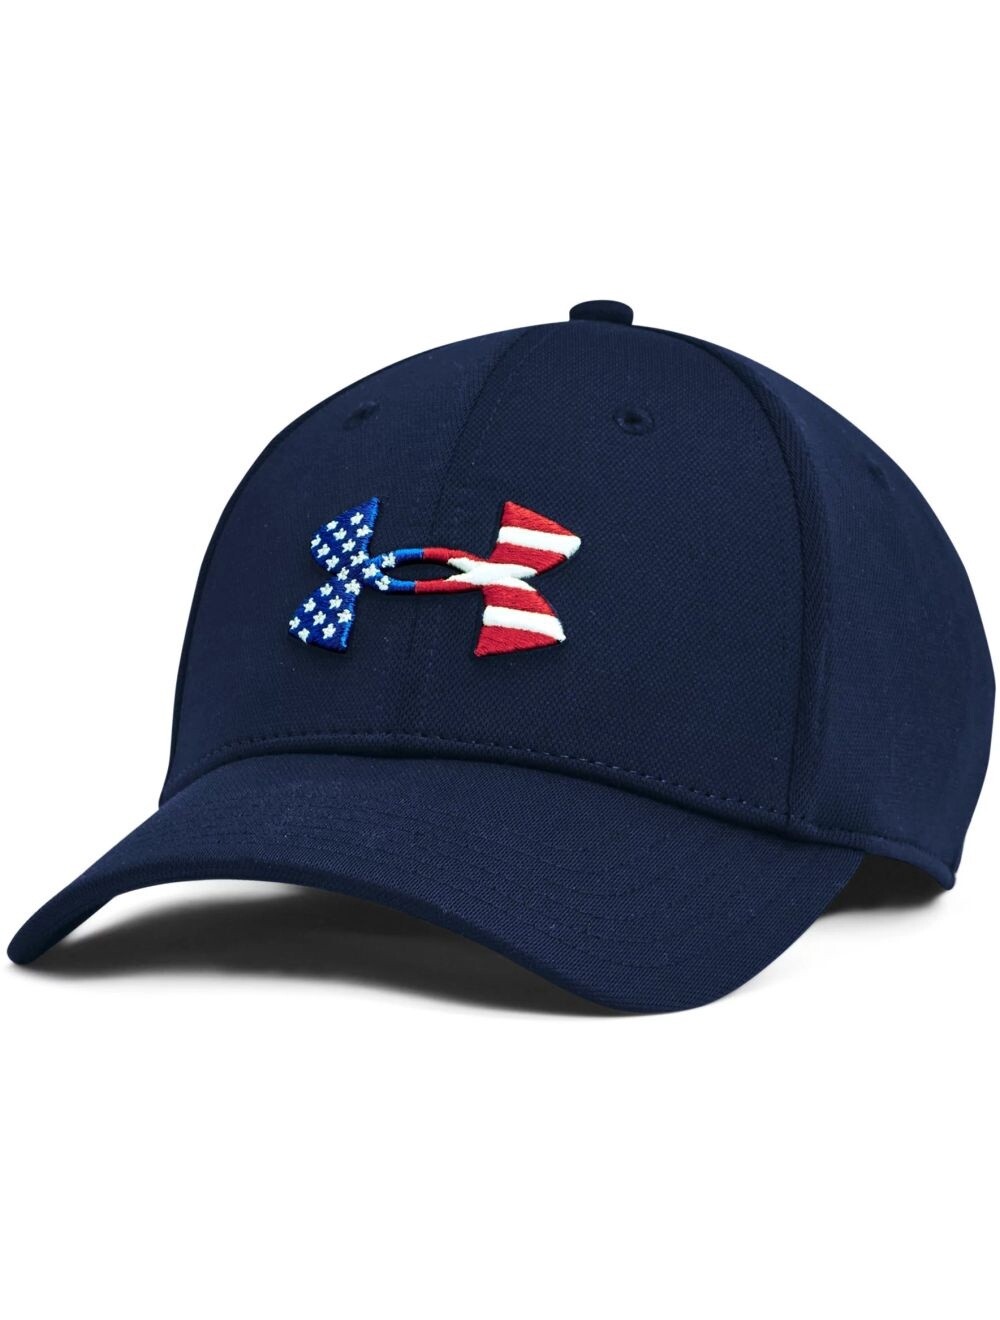 Freedom Blitzing Hat, Color: Academy, Size: MD/LG